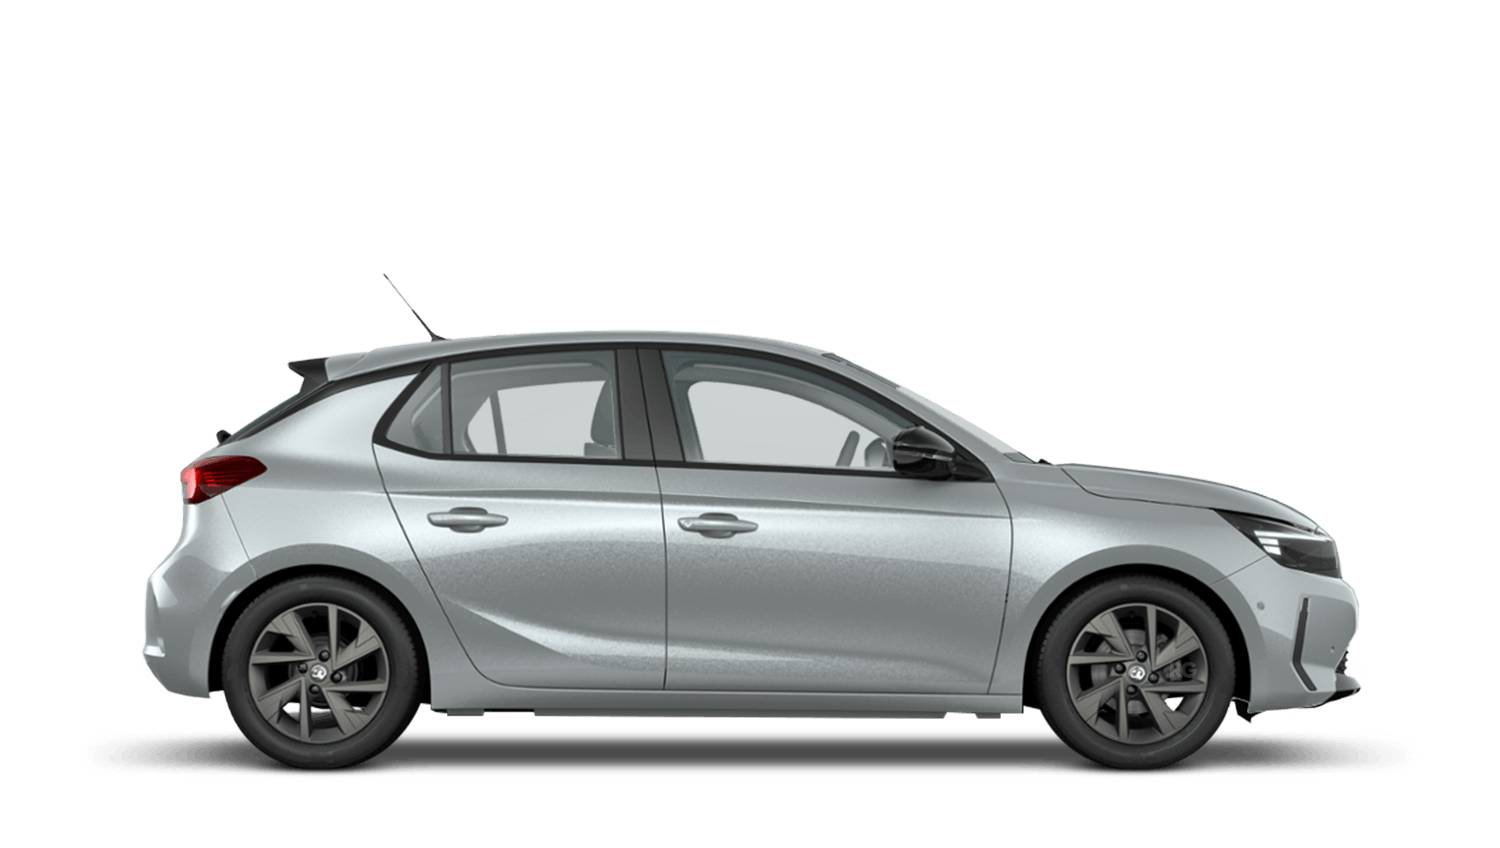 VAUXHALL CORSA DESIGN PERSONAL CONTRACT HIRE